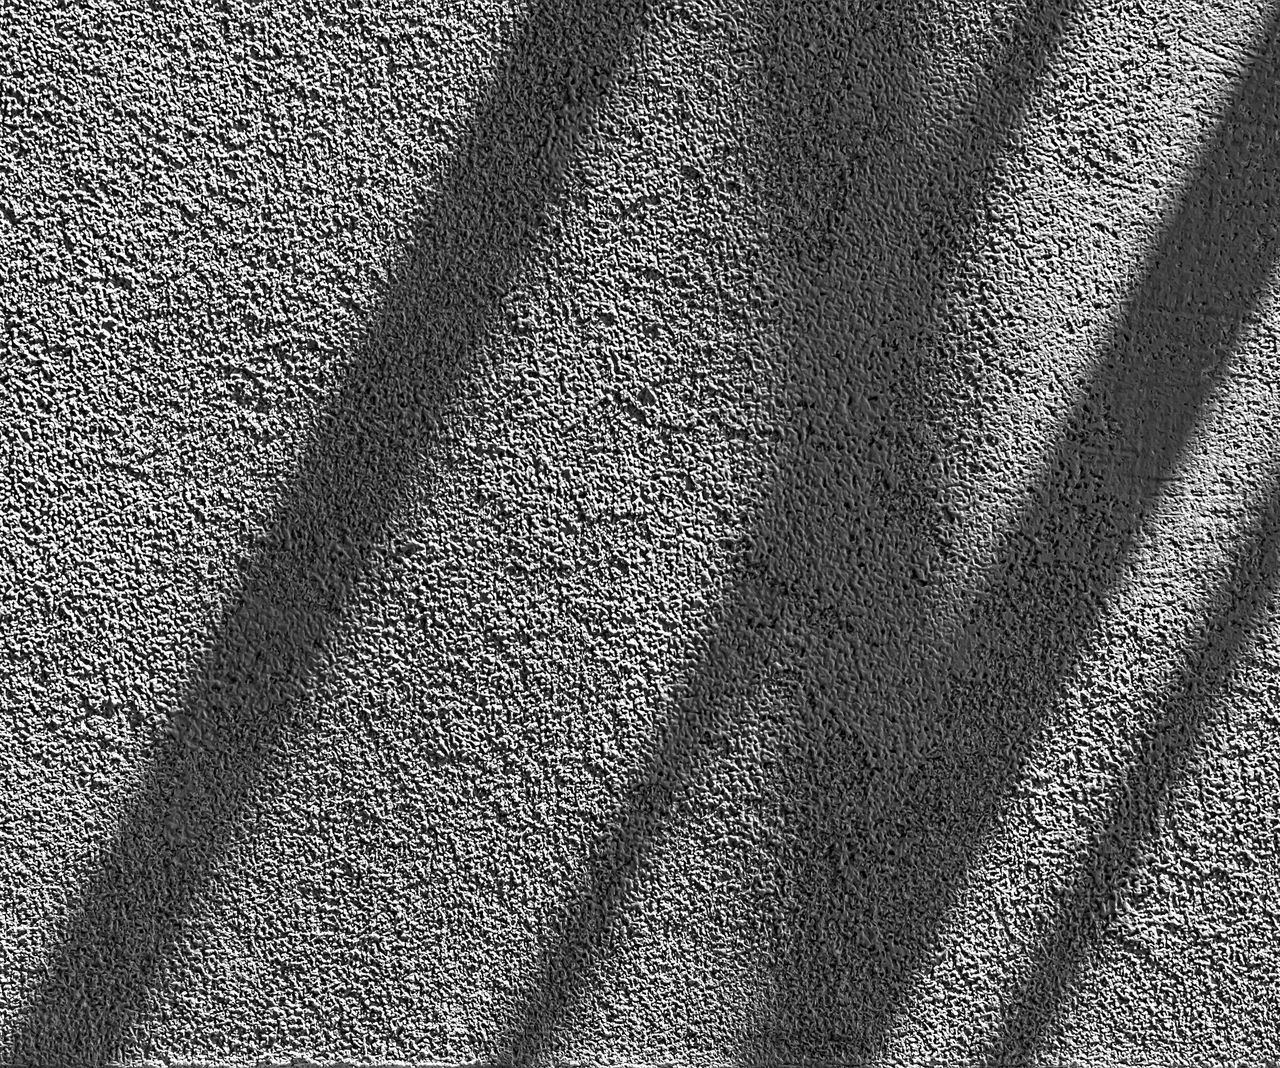 HIGH ANGLE VIEW OF SHADOW ON FOOTPATH